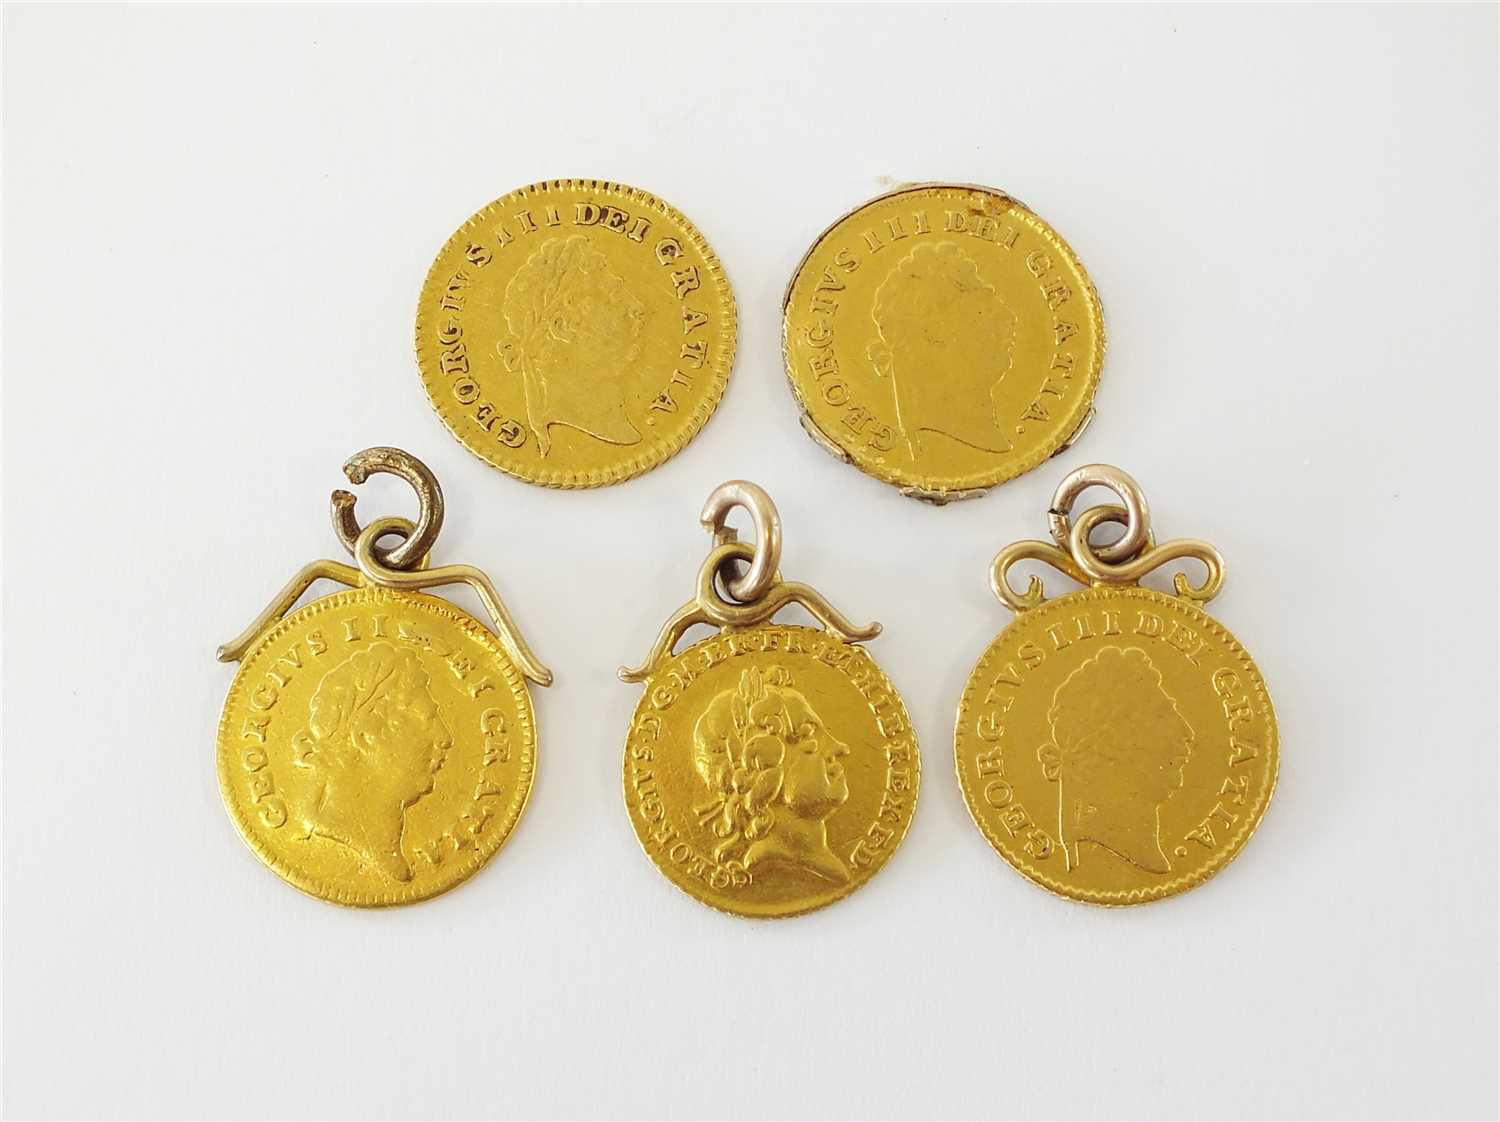 A collection of five gold British coins